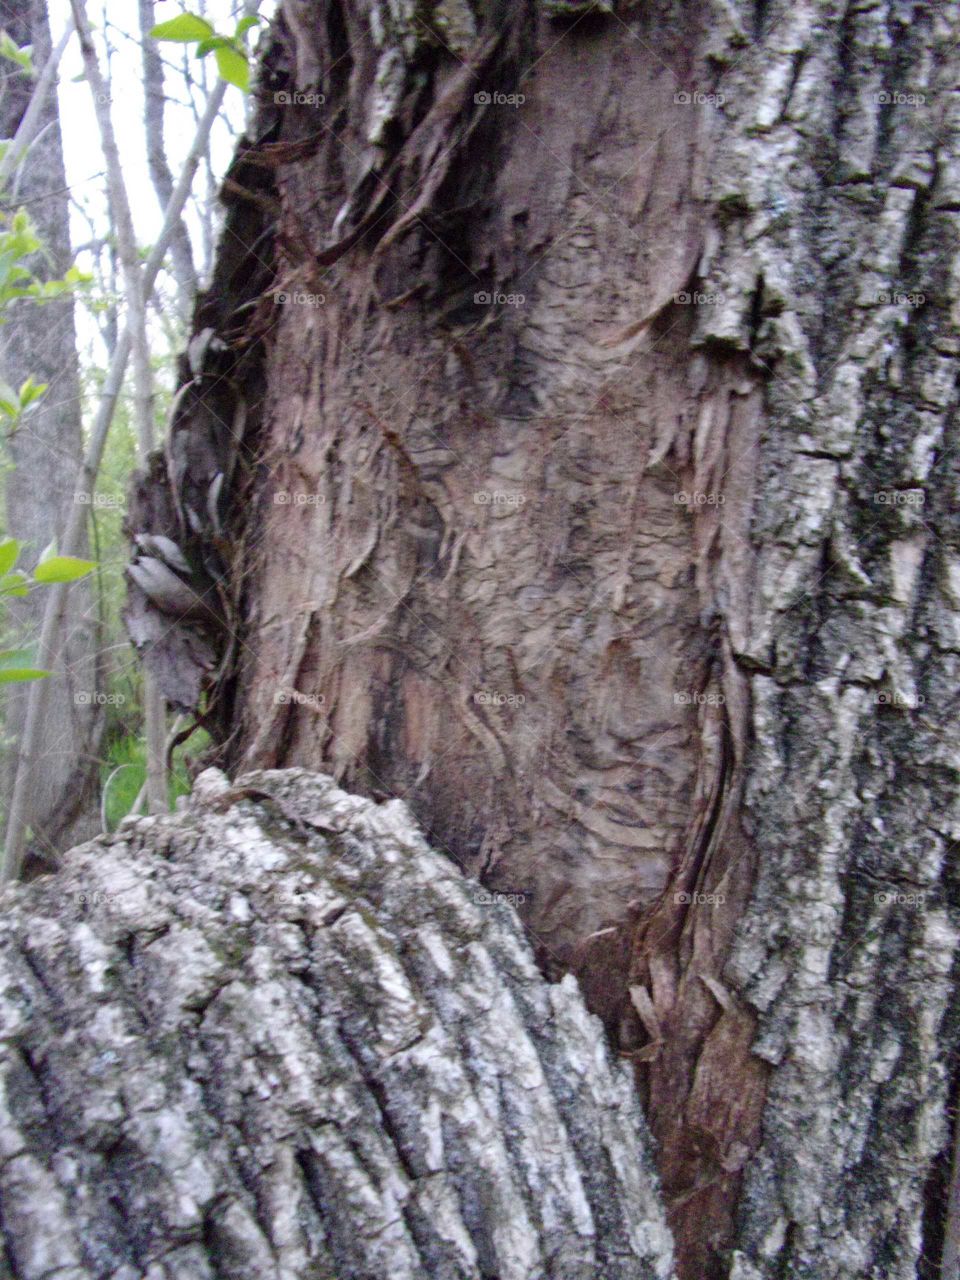 Bark curling down from a dead tree